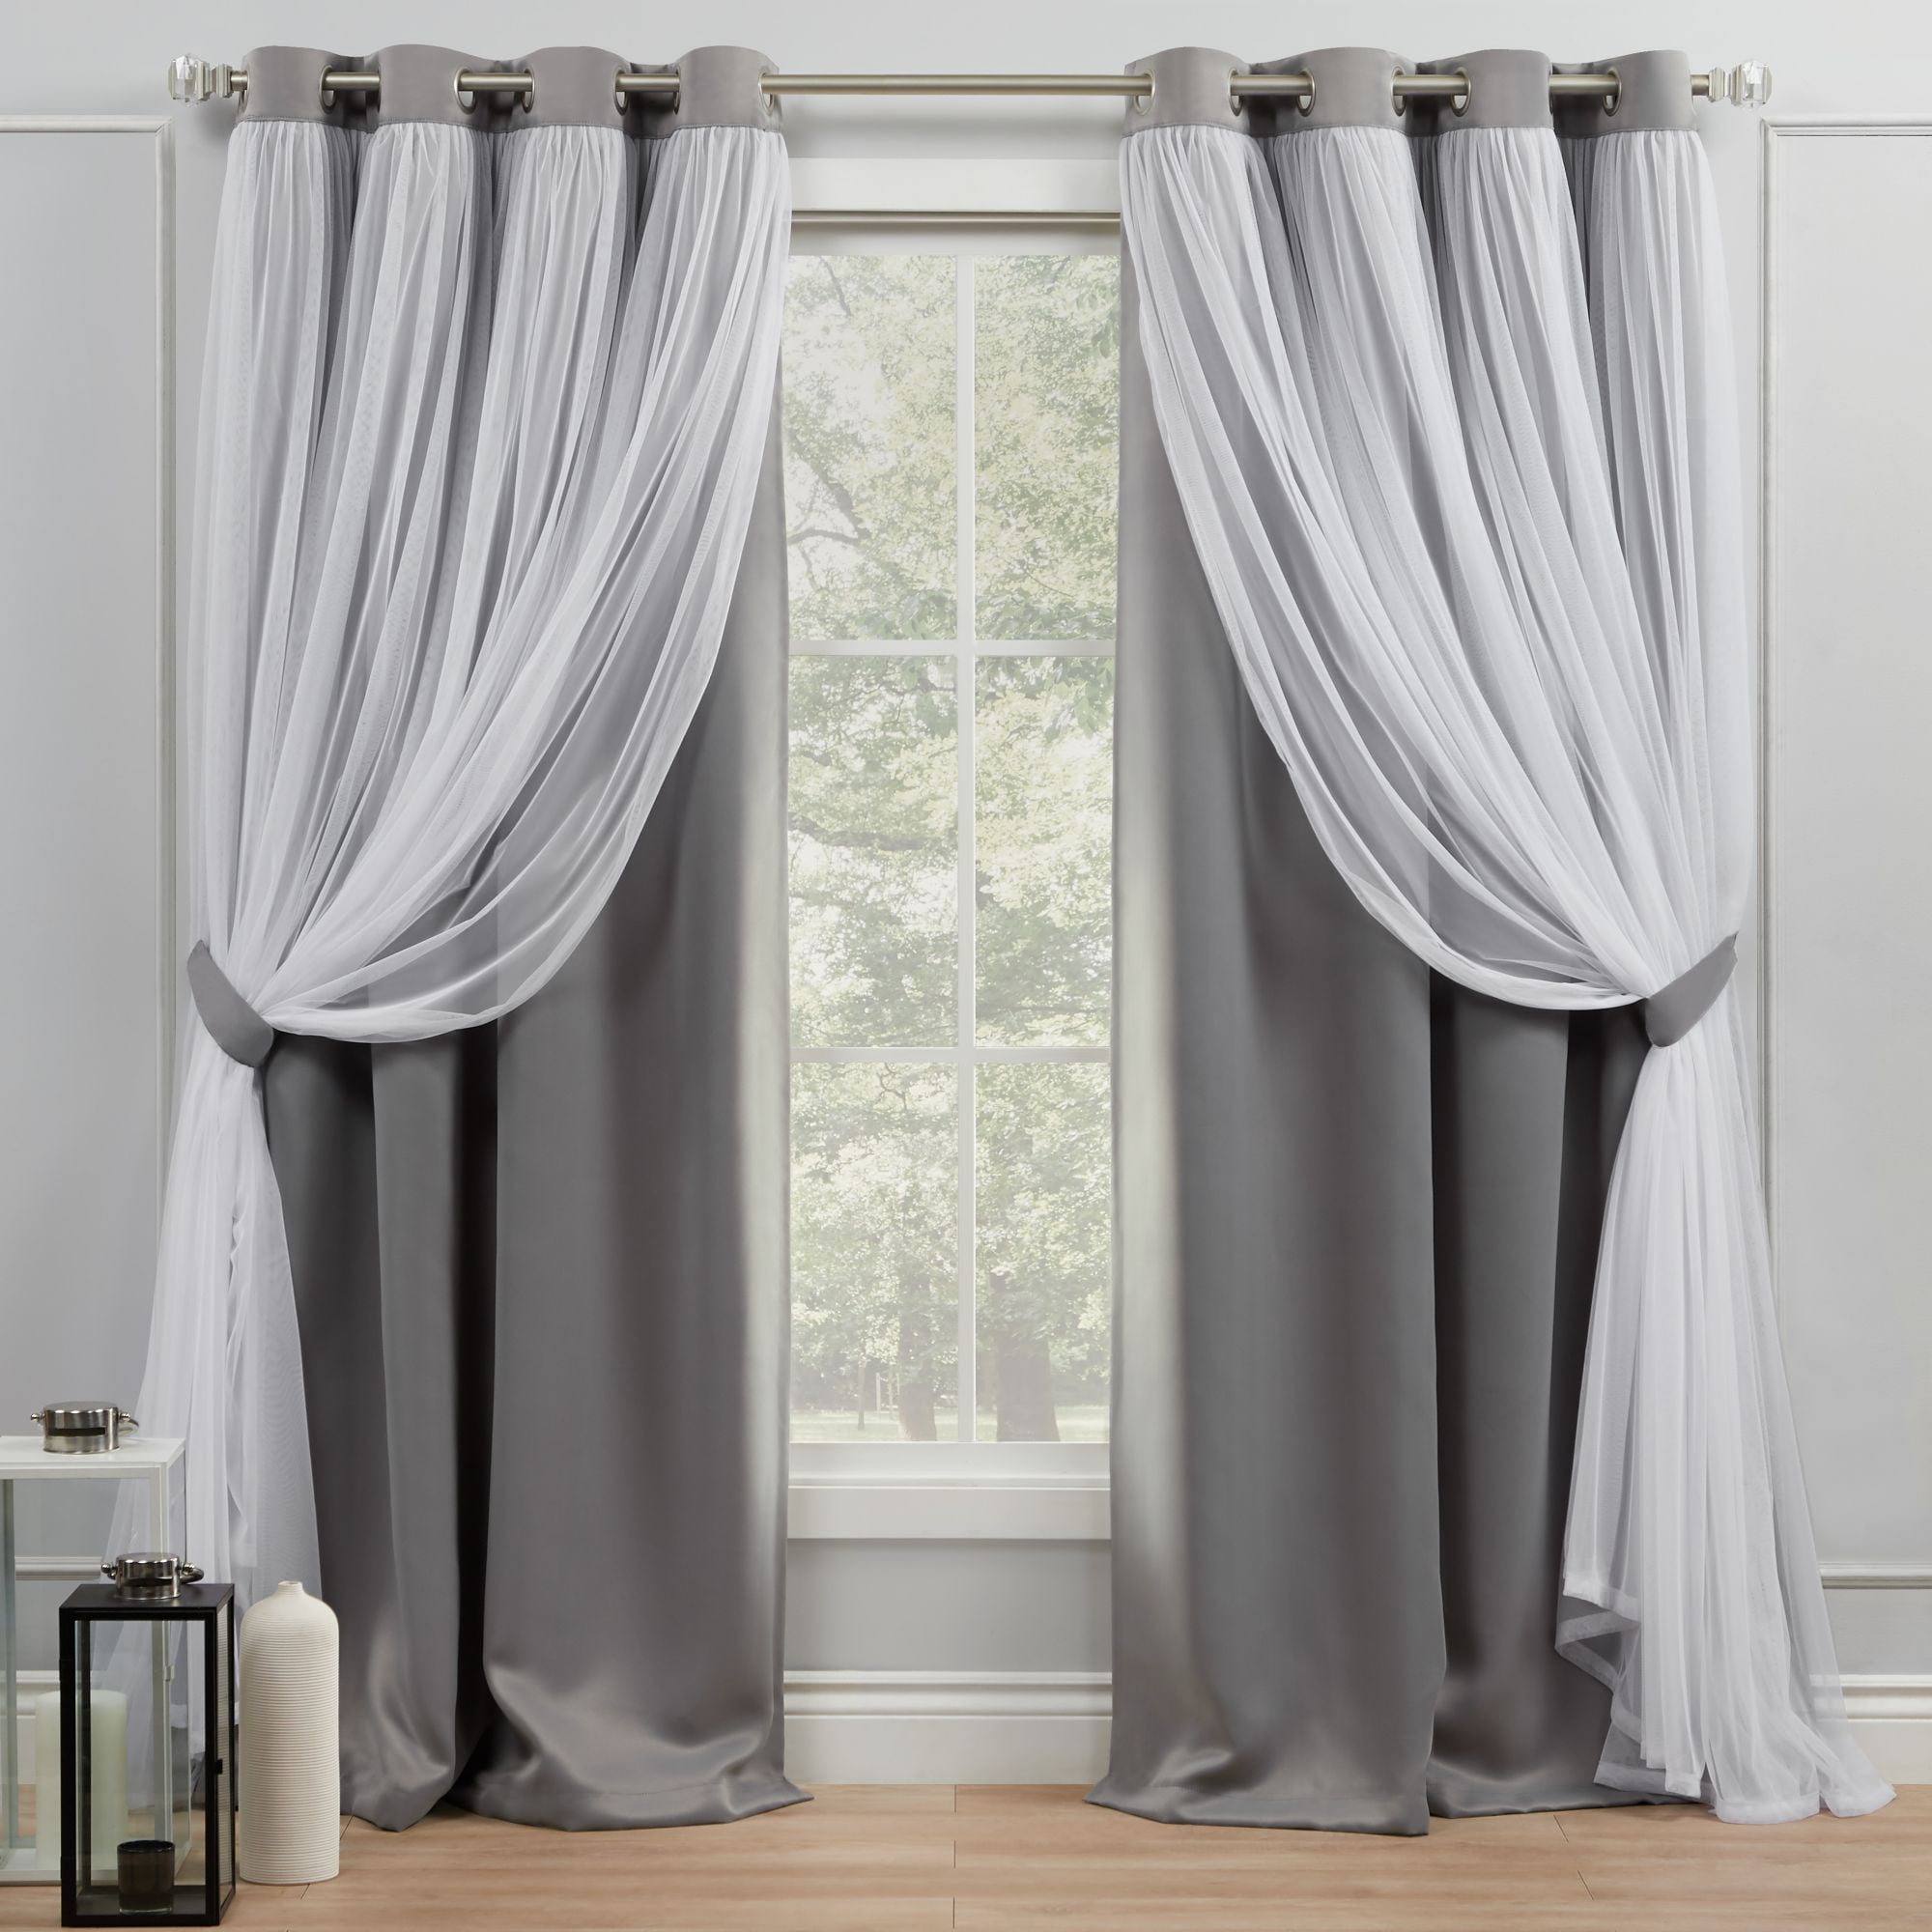 Exclusive　Room　and　Darkening　Catarina　Home　Gro-　Layered　Solid　Blackout　Sheer